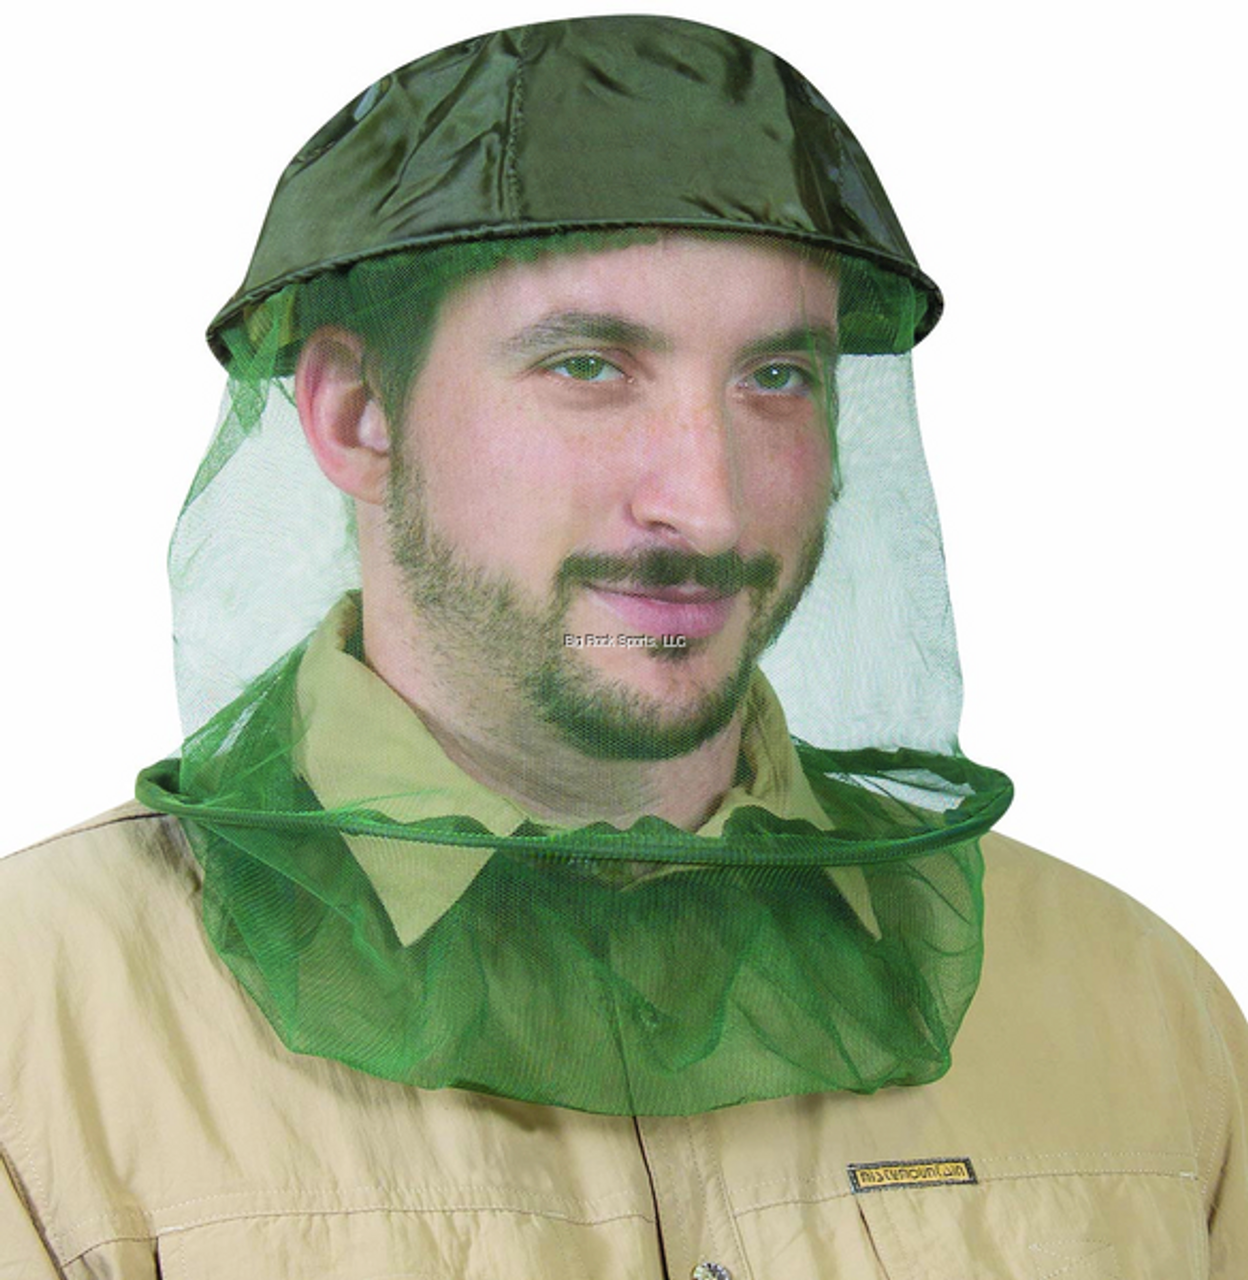 Bushline Mosquito Head Net, Cotton Crown And Netting, Adjustable Size Inside Crown with Elastic Ties